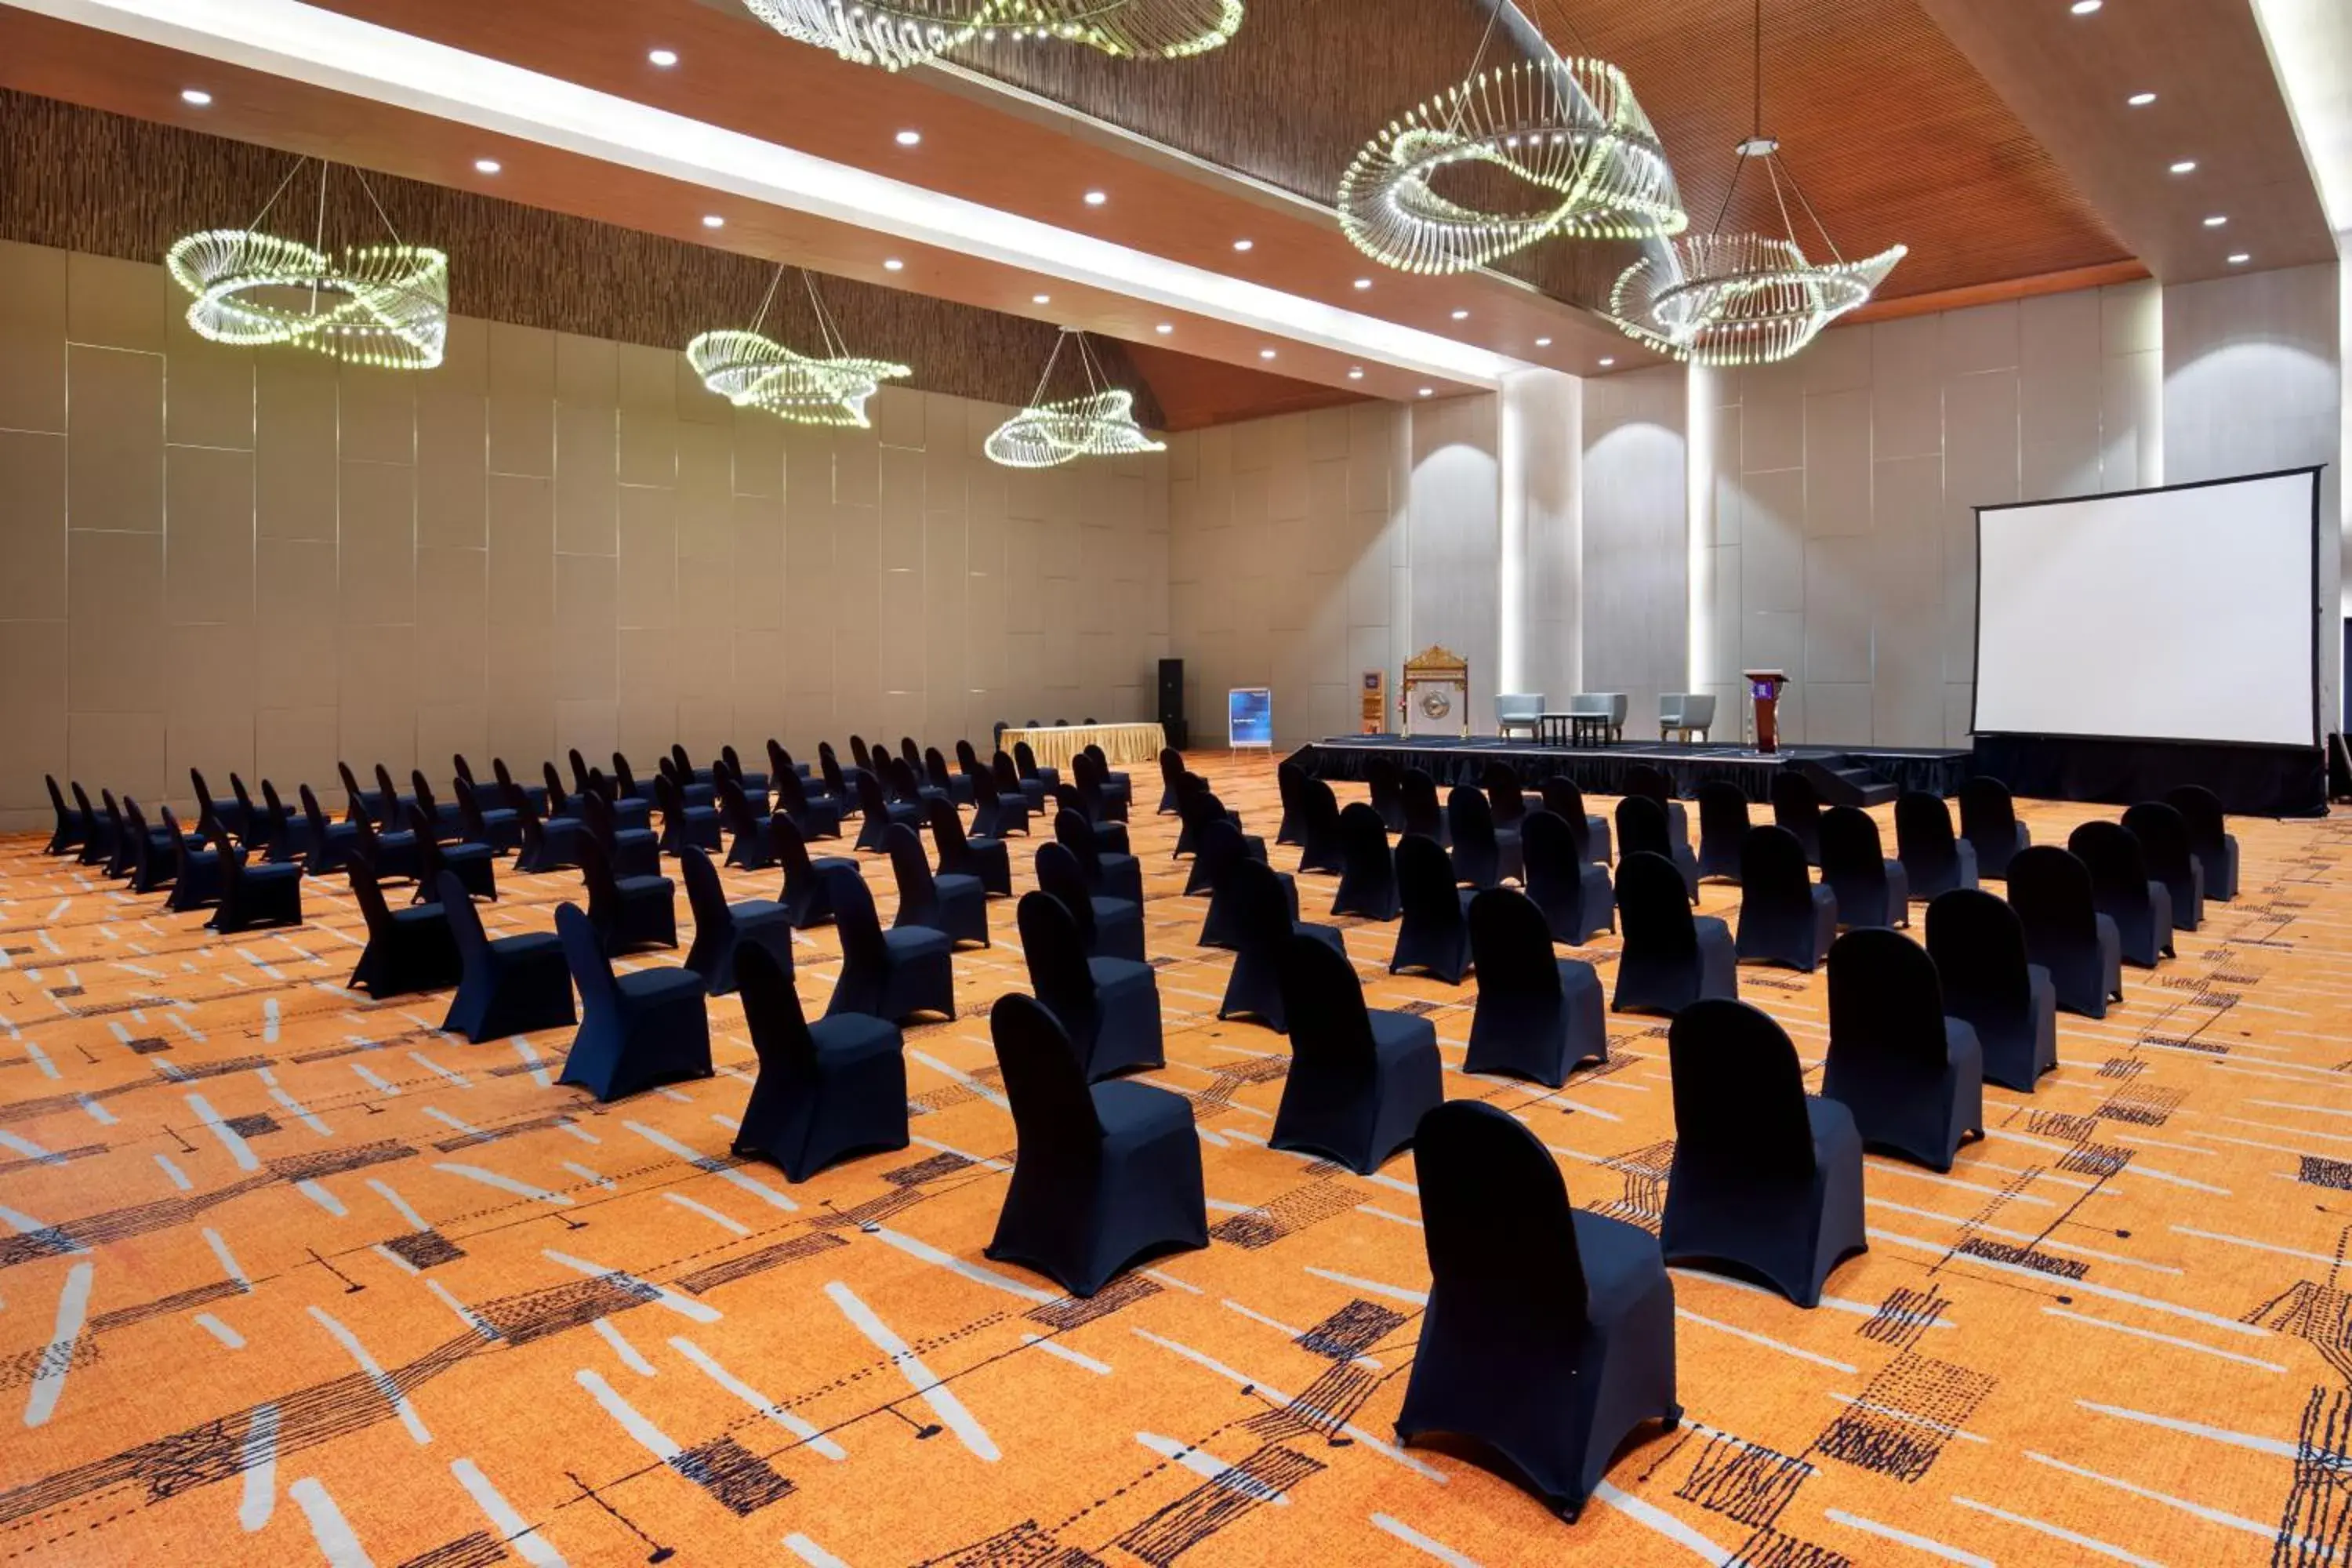 Meeting/conference room in Novotel Palembang Hotel